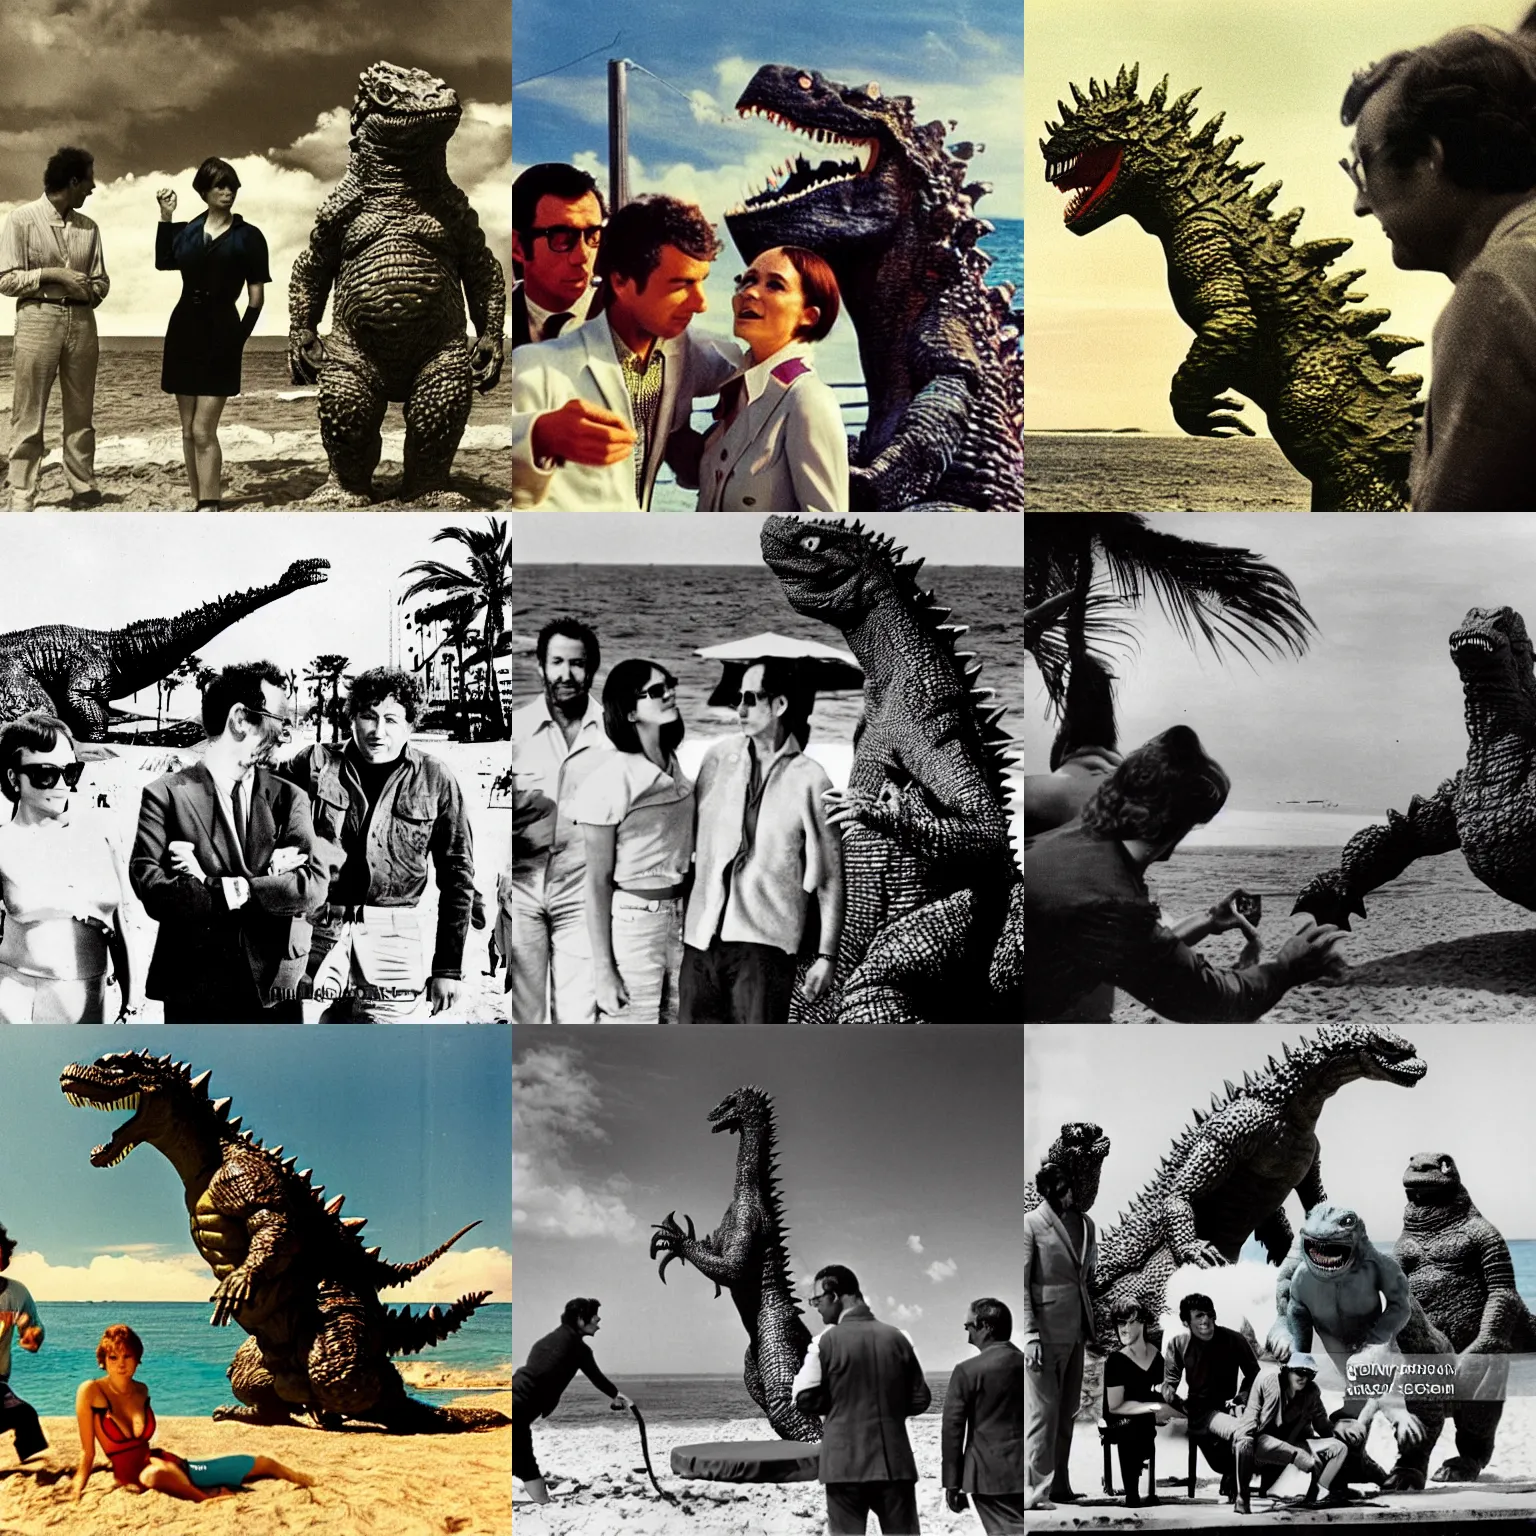 Prompt: photoshoot in technicolor of godzilla on a beach in cannes. godzilla is a big monster with scales. godzilla is at the center surrounded by jean - luc godard and anna karina. in color. close - up on godzilla, jean - luc godard and anna karina